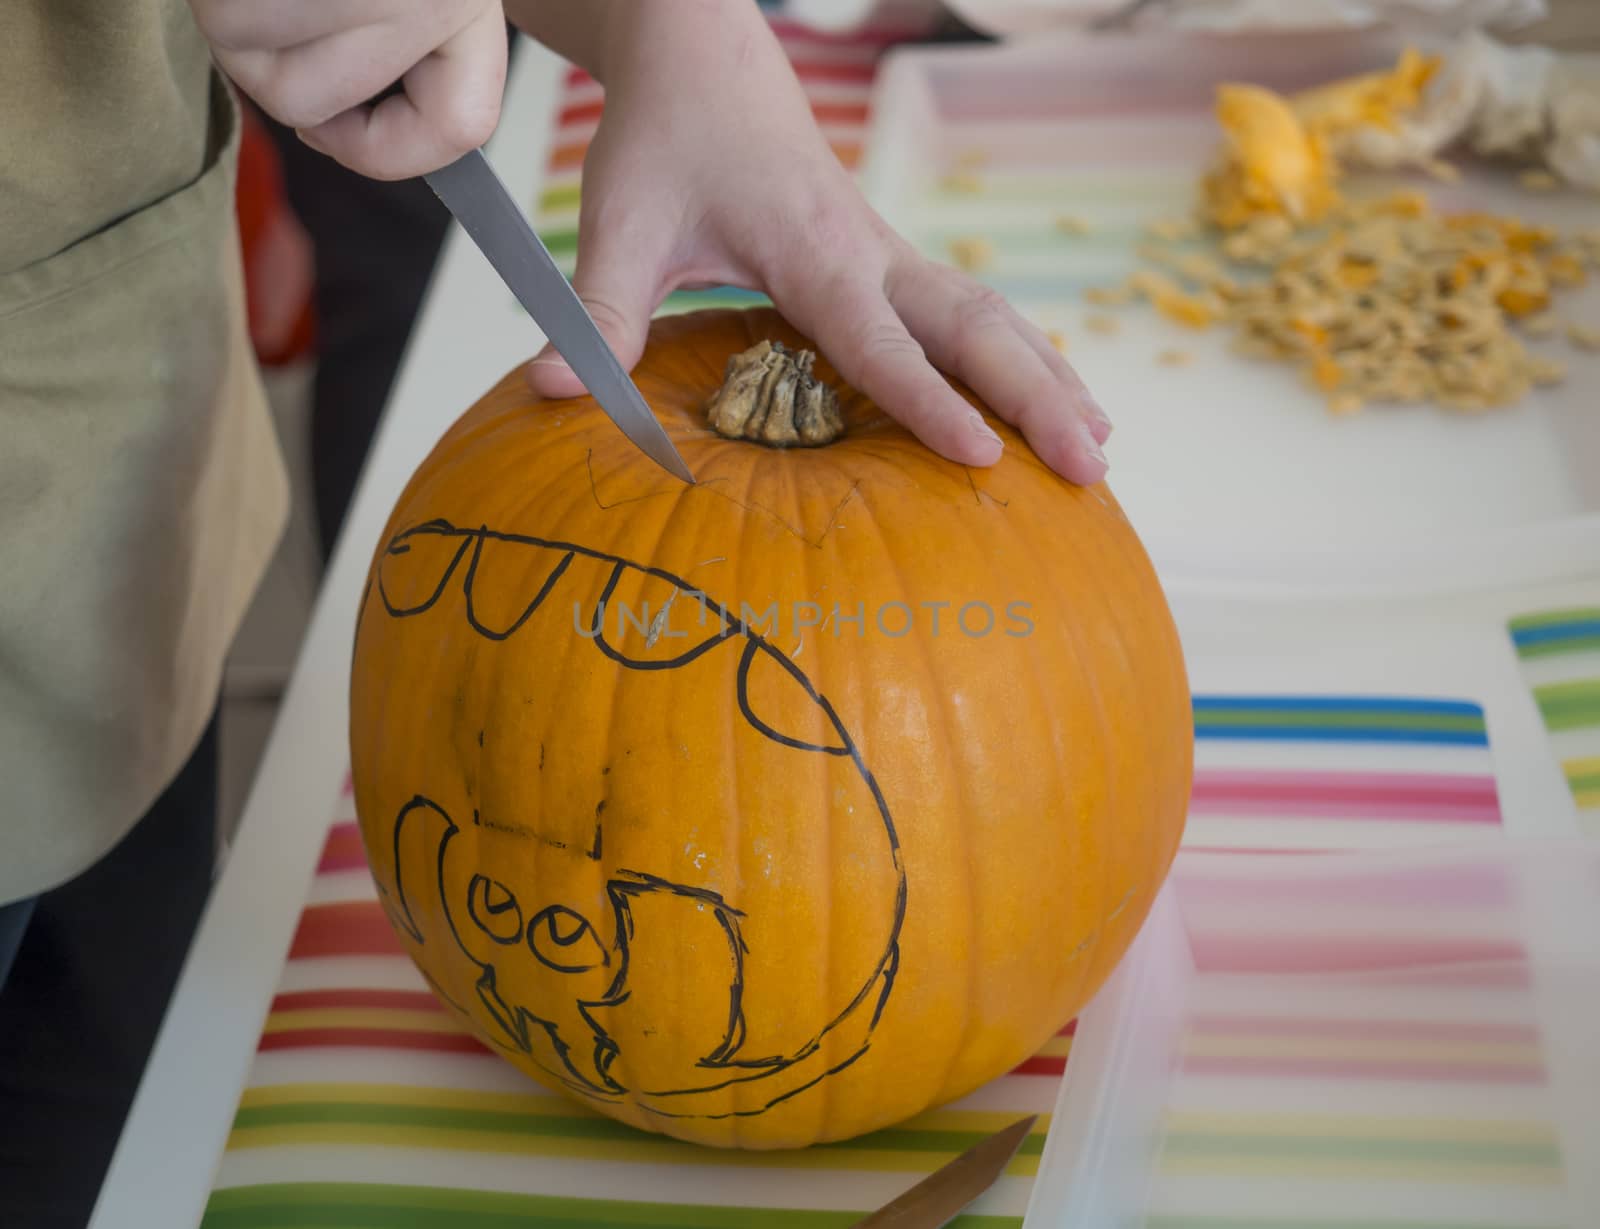 Process of carving pumpkin to make Jack-o-lantern. Creating traditional decoration for Halloween and Thanksgiving. Cutted orange pumpkin lay on table in woman hands